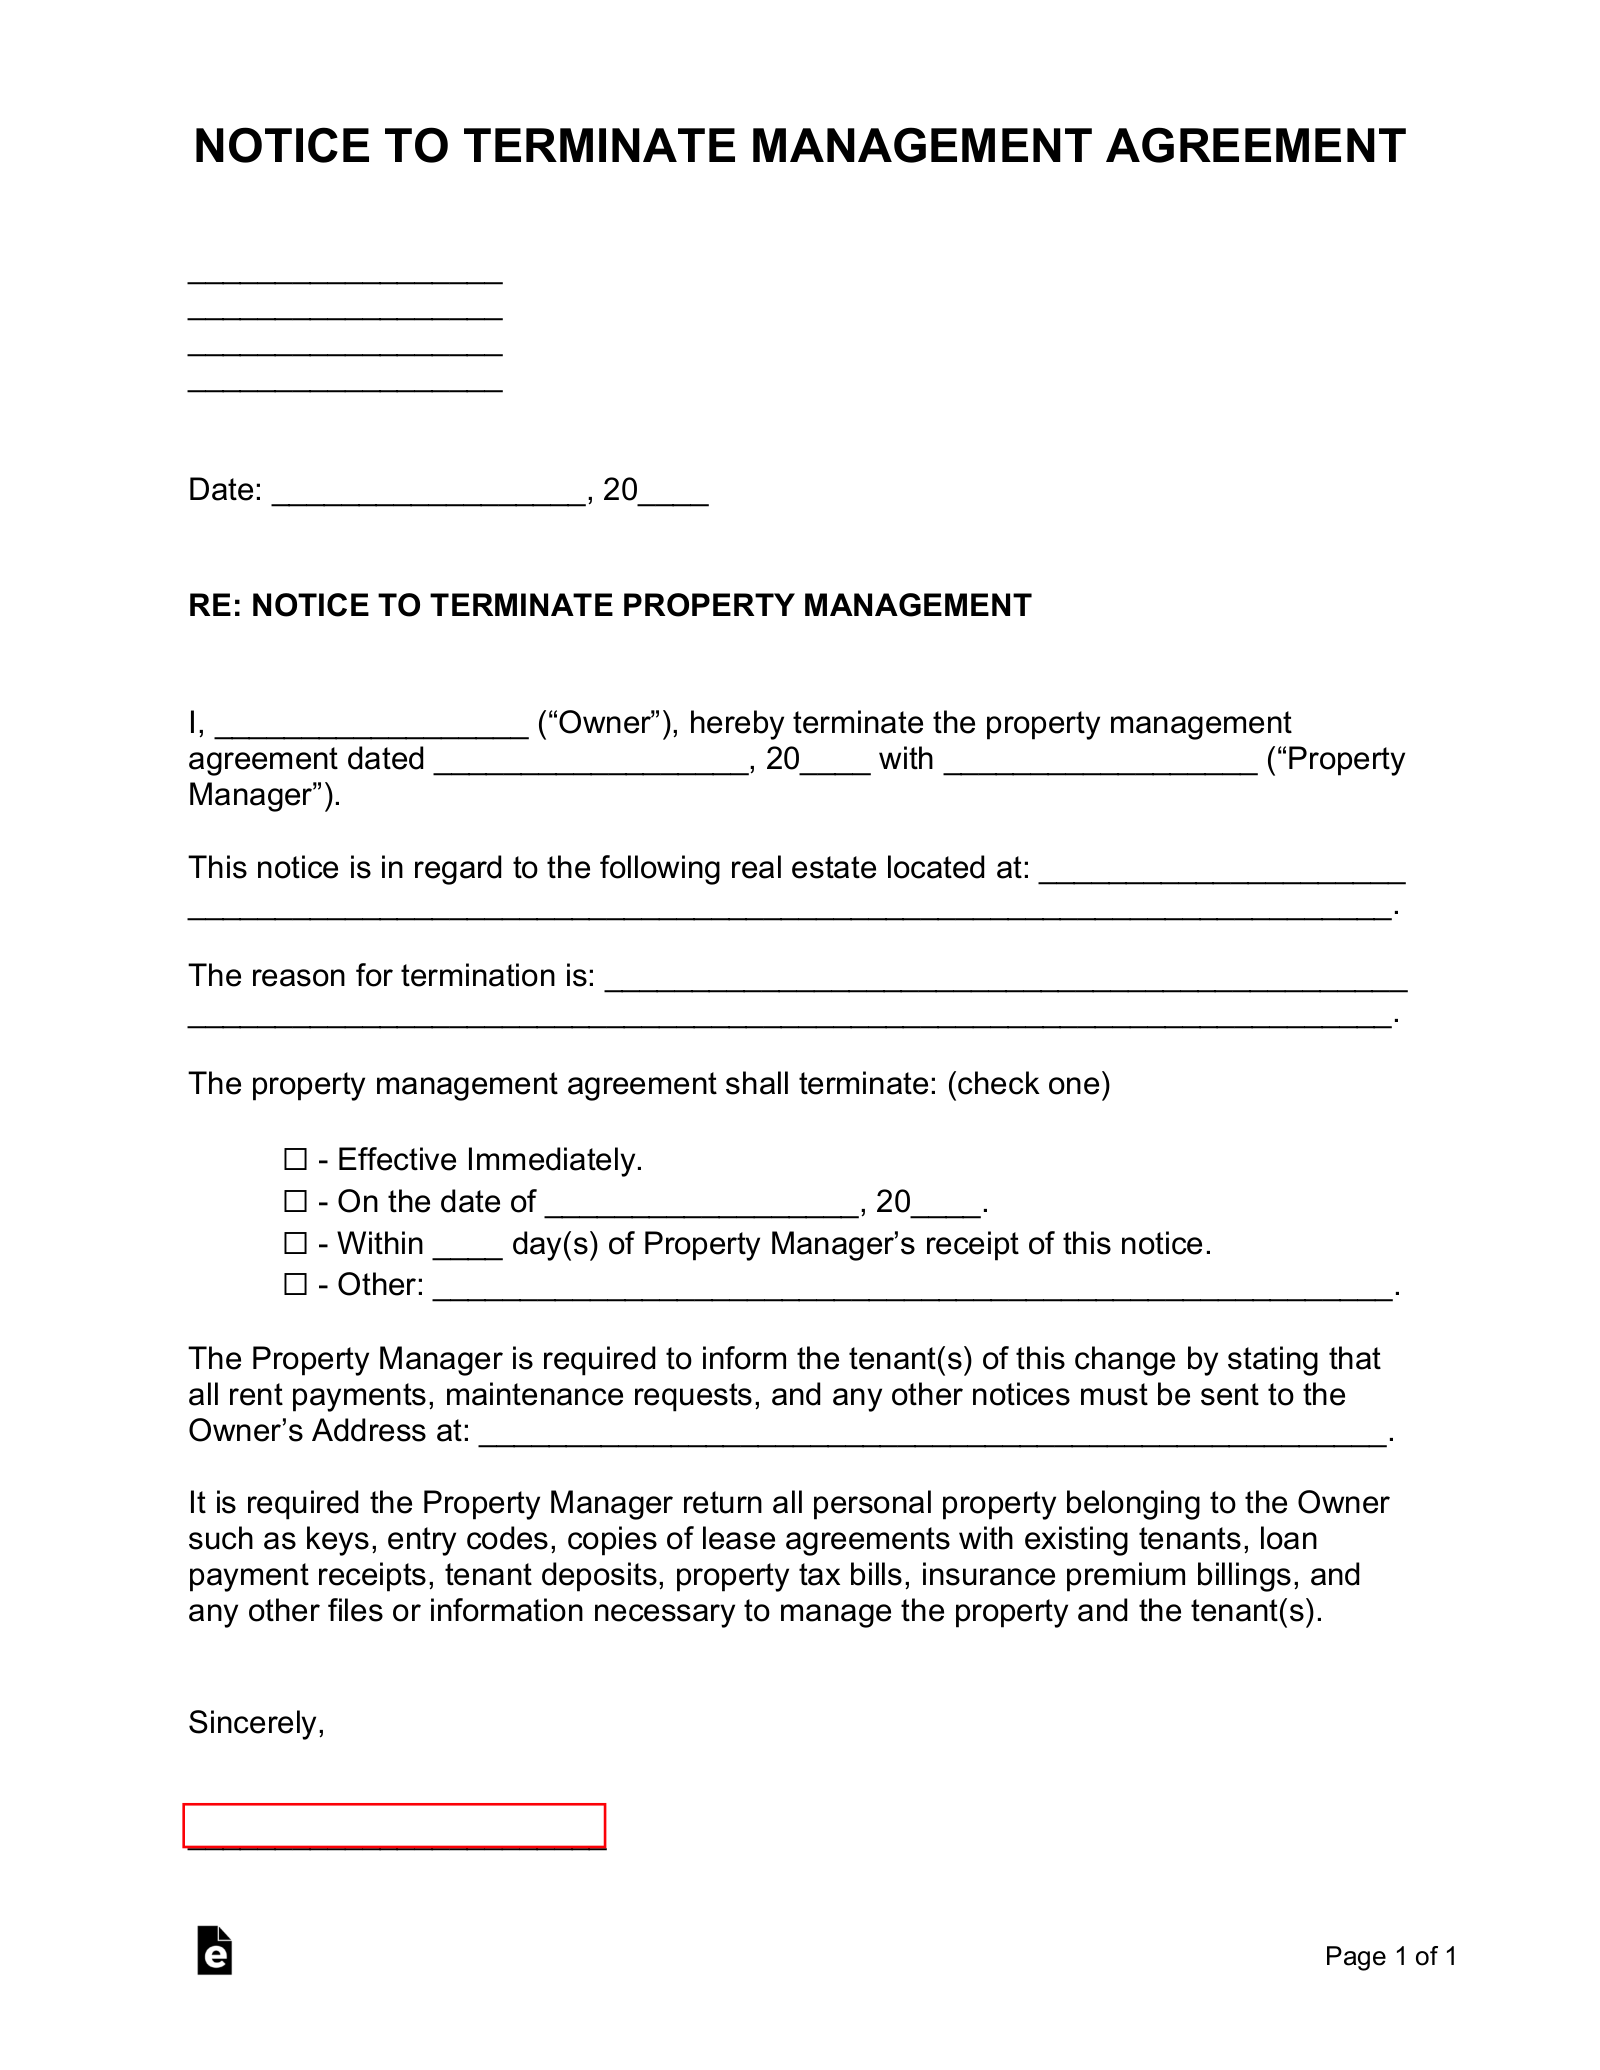 Free Notice to Terminate a Property Management Agreement